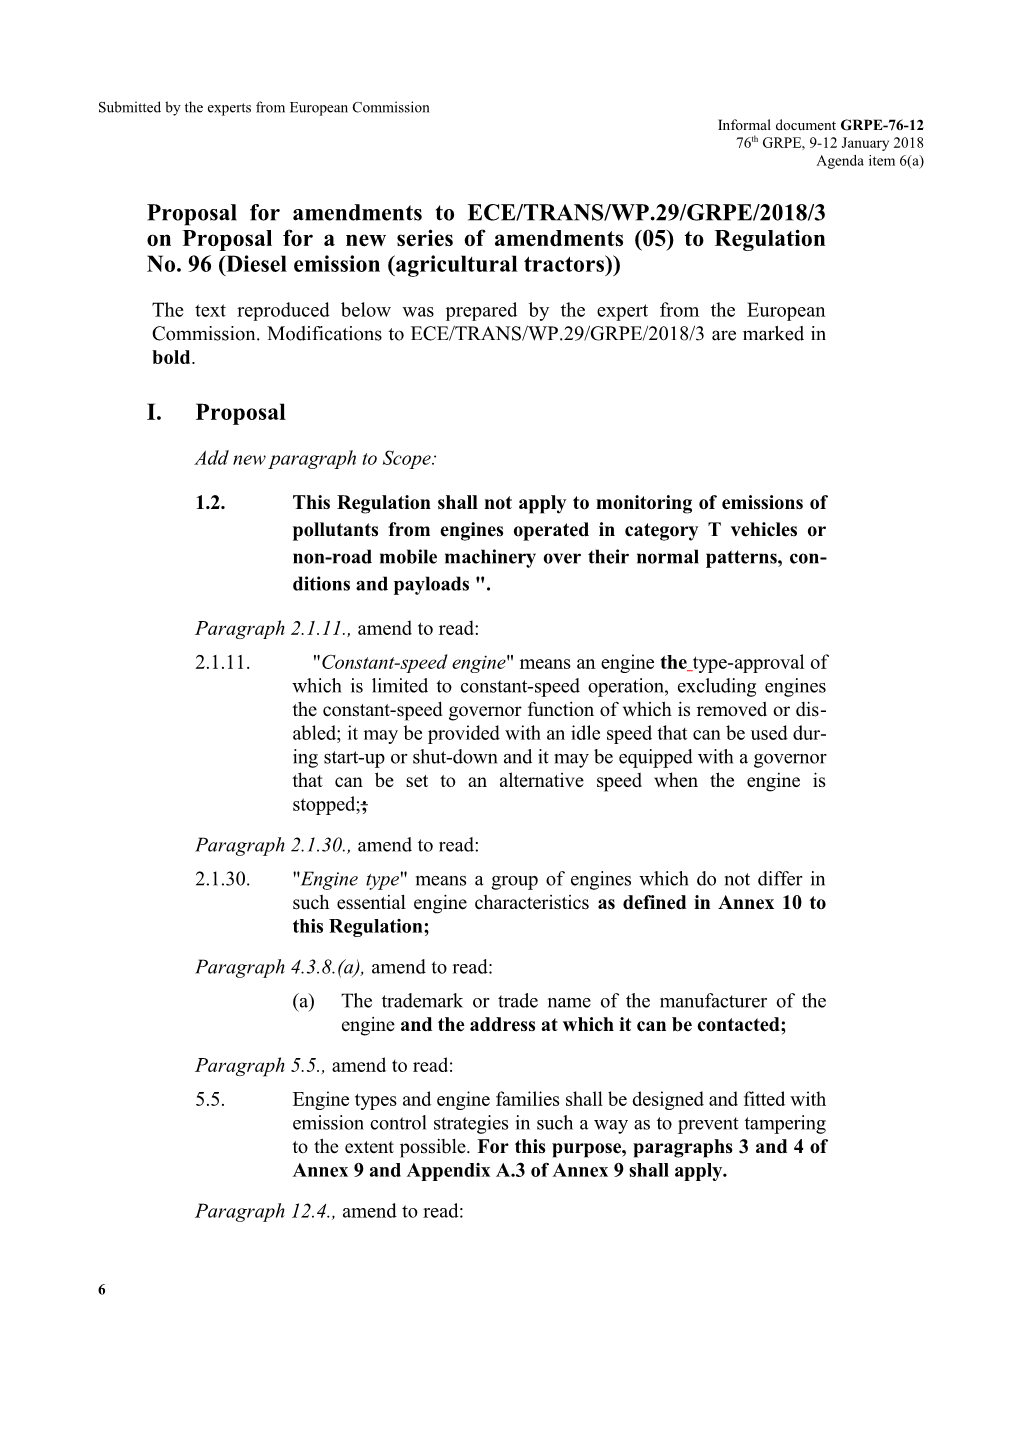 Proposal for Amendments to ECE/TRANS/WP.29/GRPE/2018/3On Proposal for a New Series Of